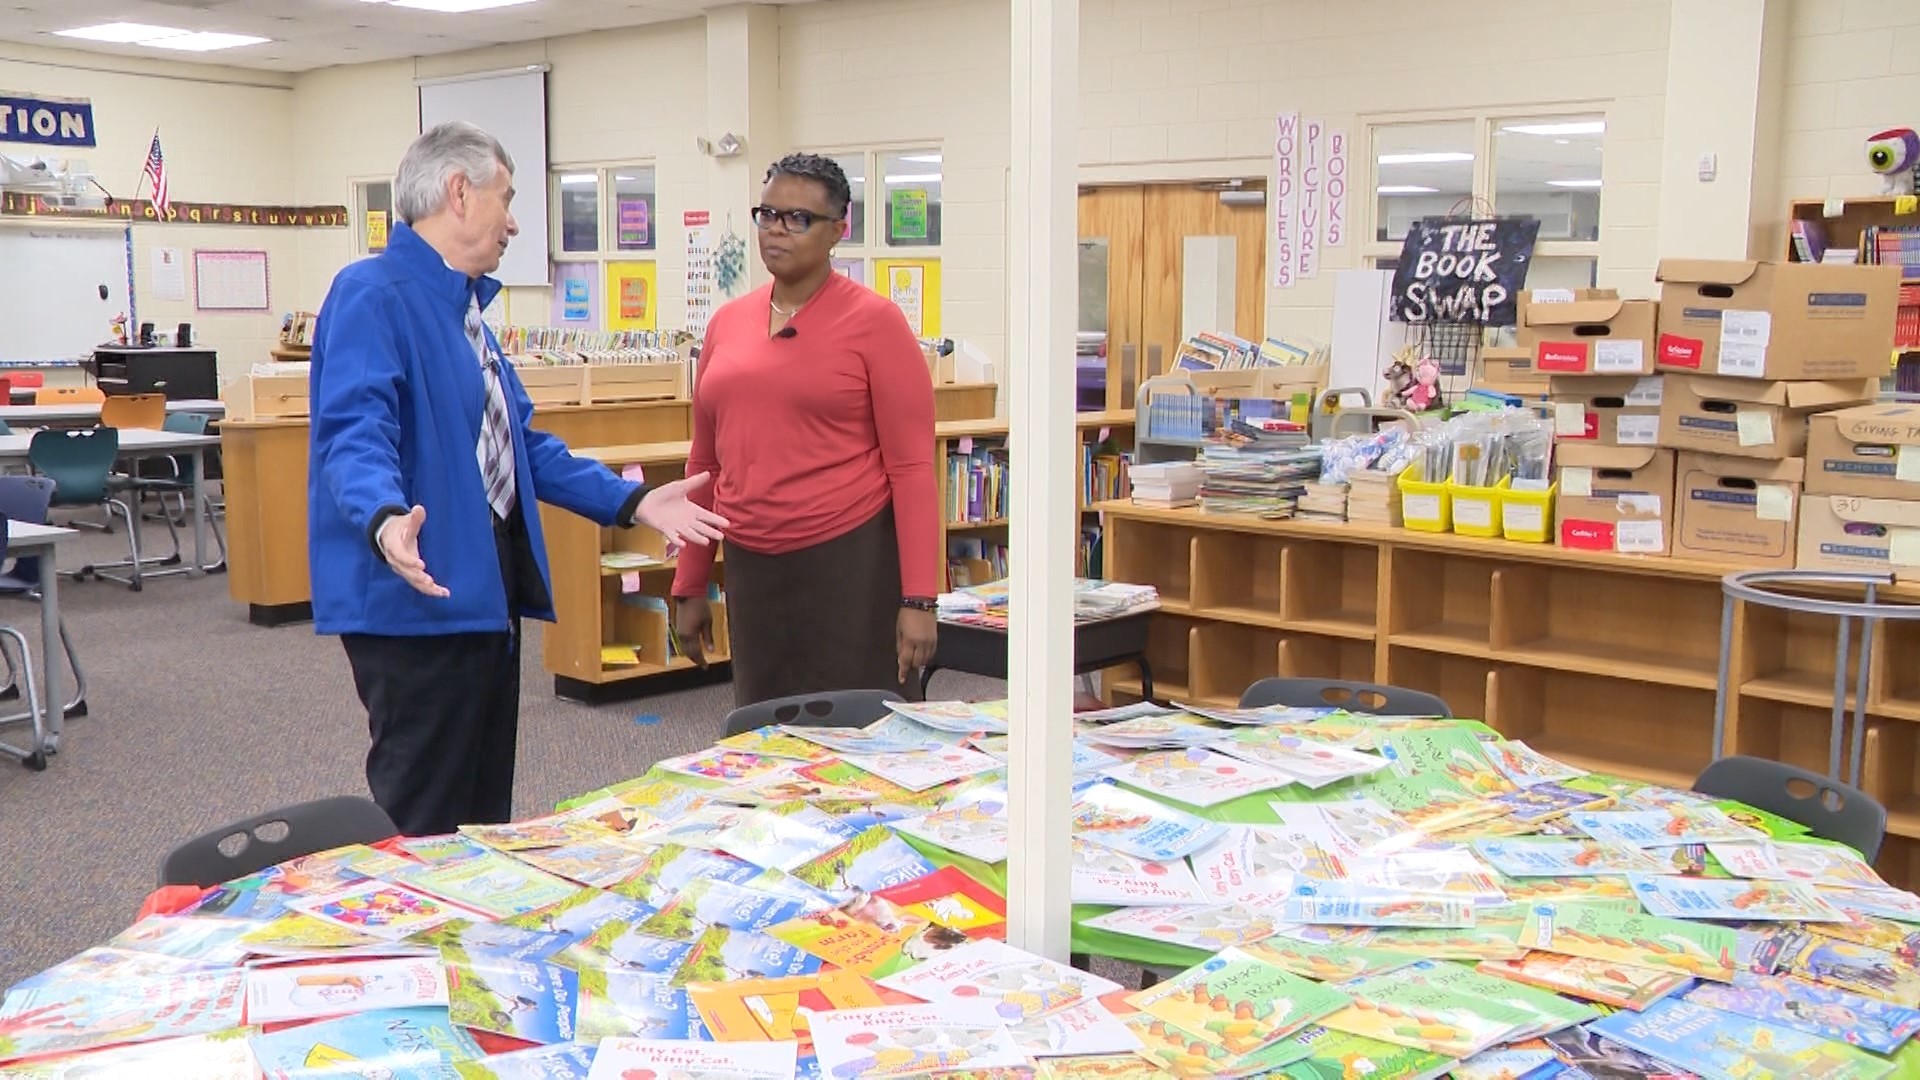 Promising Pages is making a difference by bringing free books and stories to kids who may not have their own.